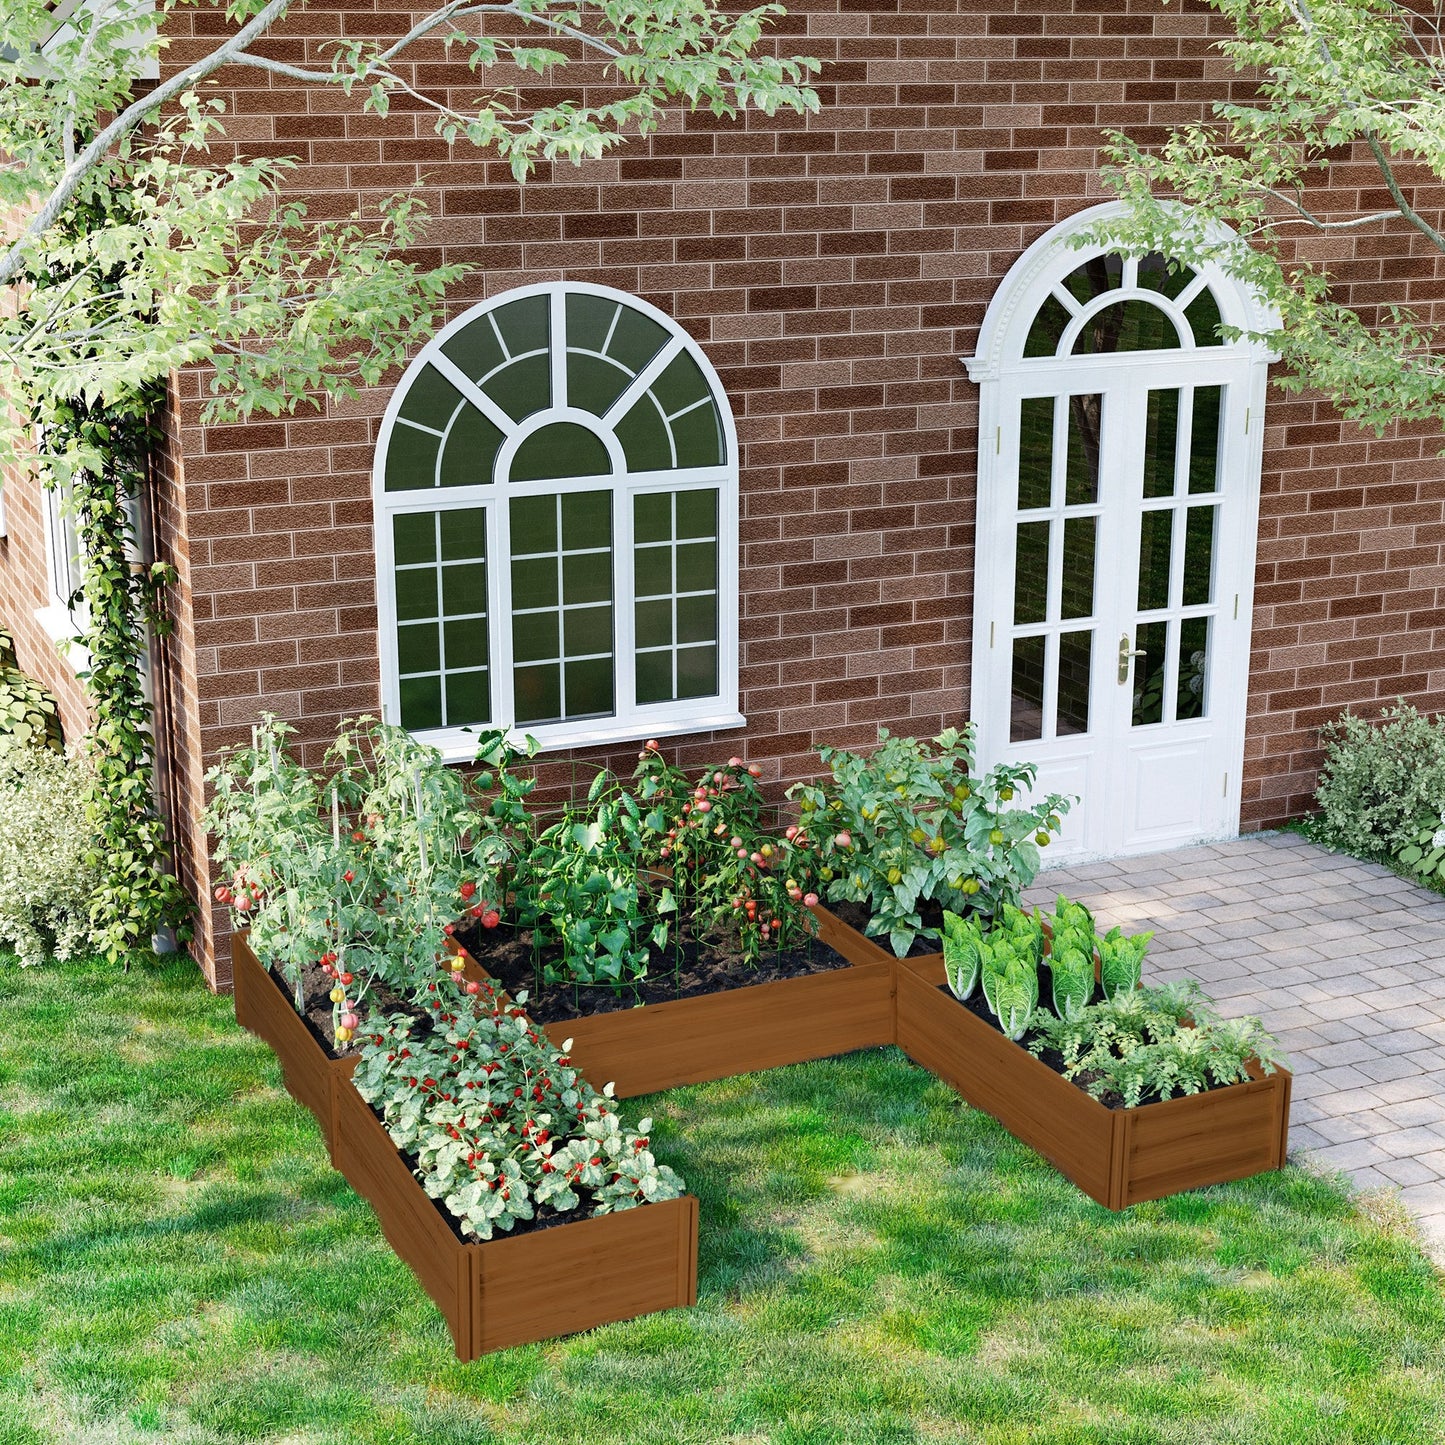 Outdoor and Garden-Raised Garden Bed, Set of 5 Large Wooden Box Planters for Outdoor Plants Vegetables Flowers Herbs, 7.5x7.5x1ft, Brown - Outdoor Style Company